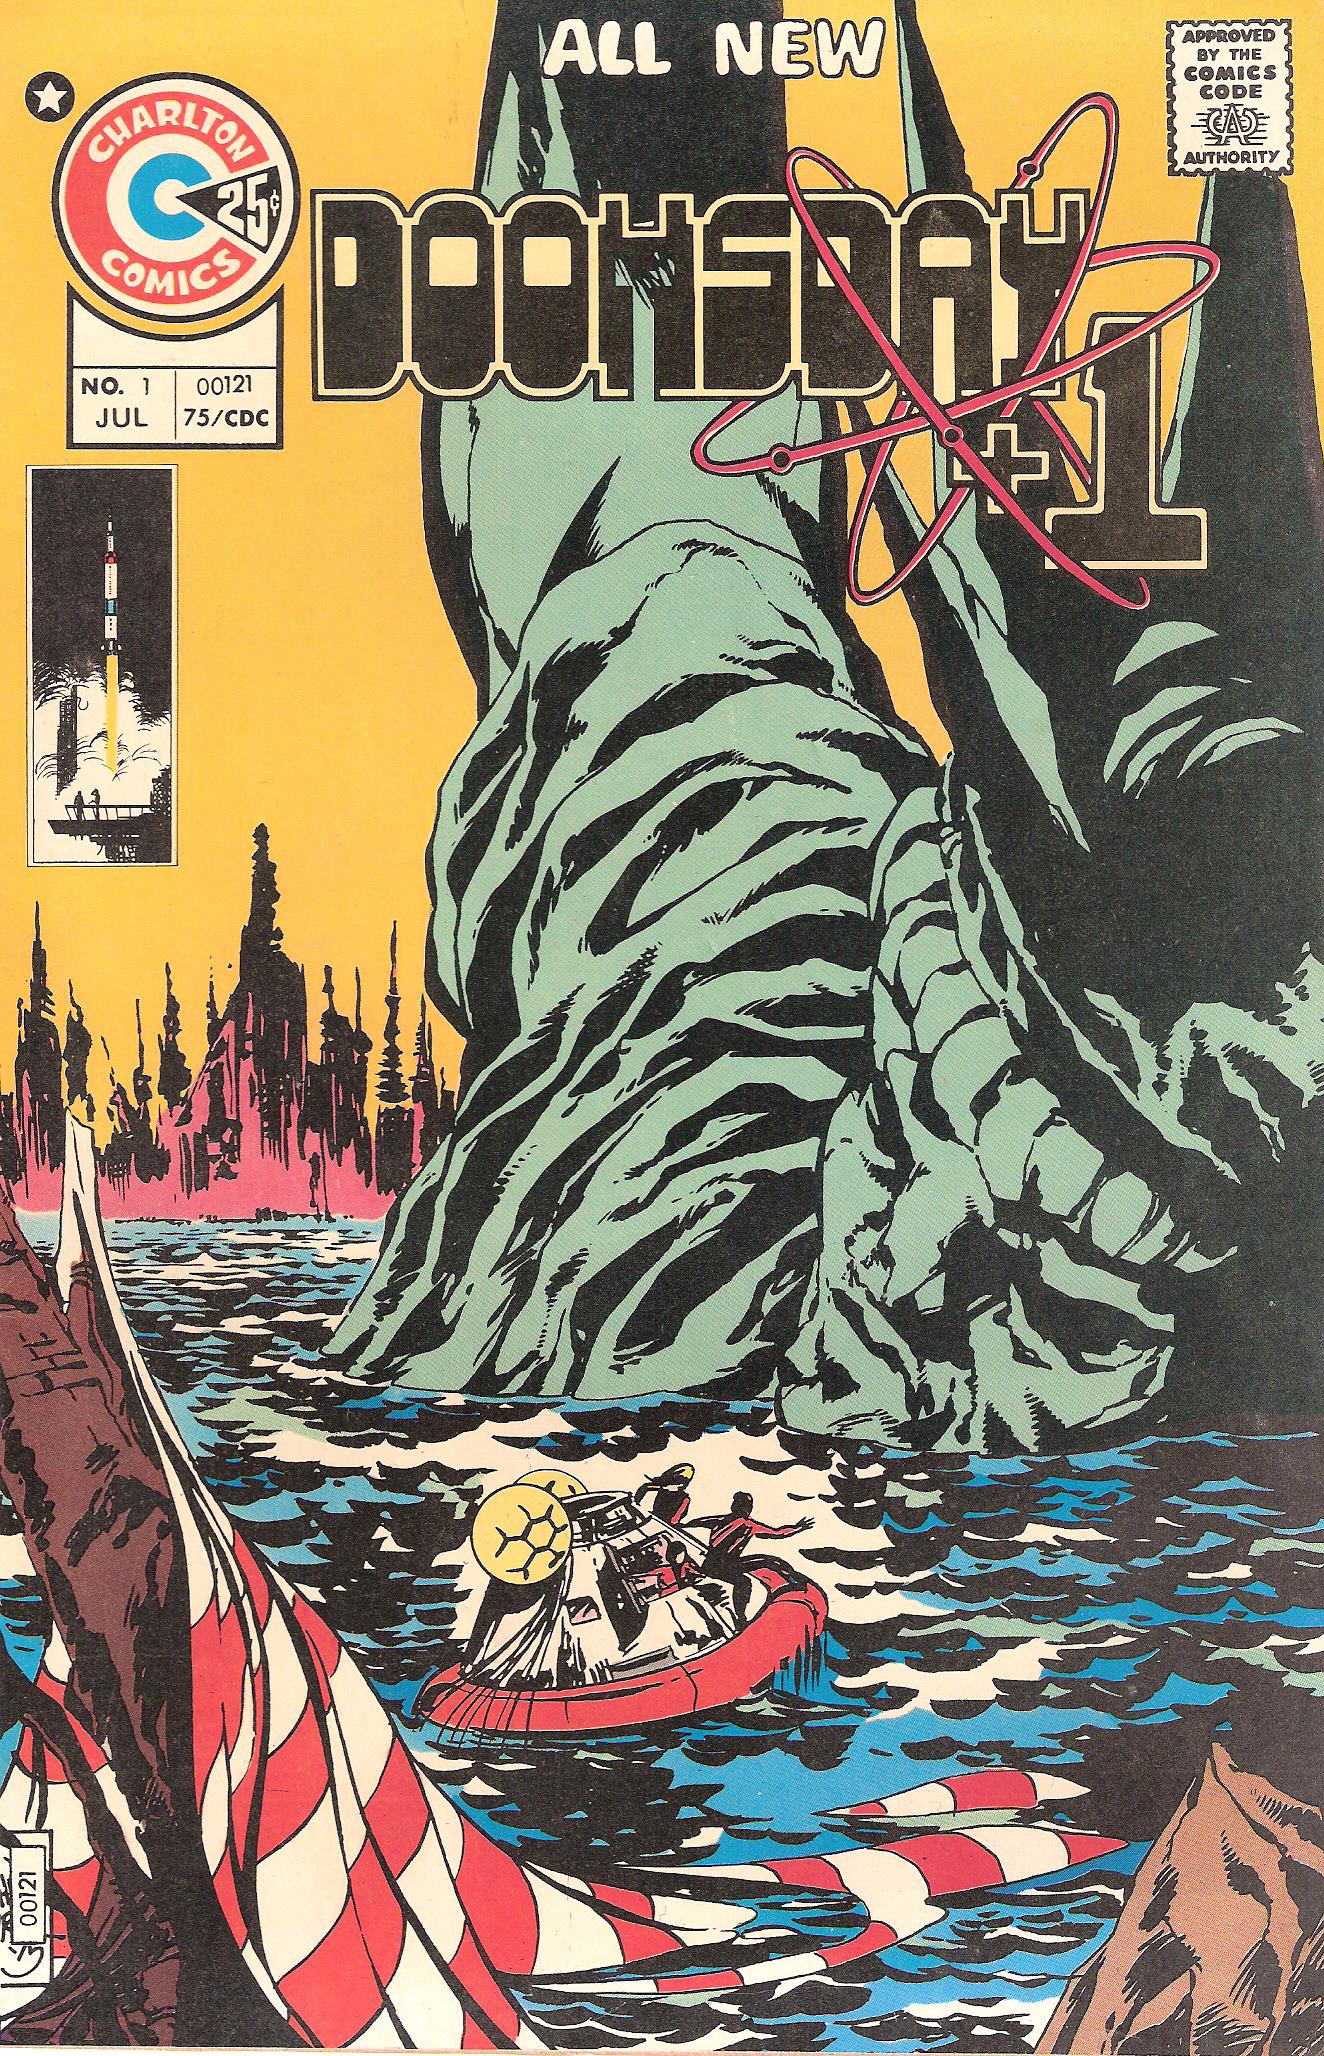 And here's Byrne's cover to Doomsday+1, from 1975